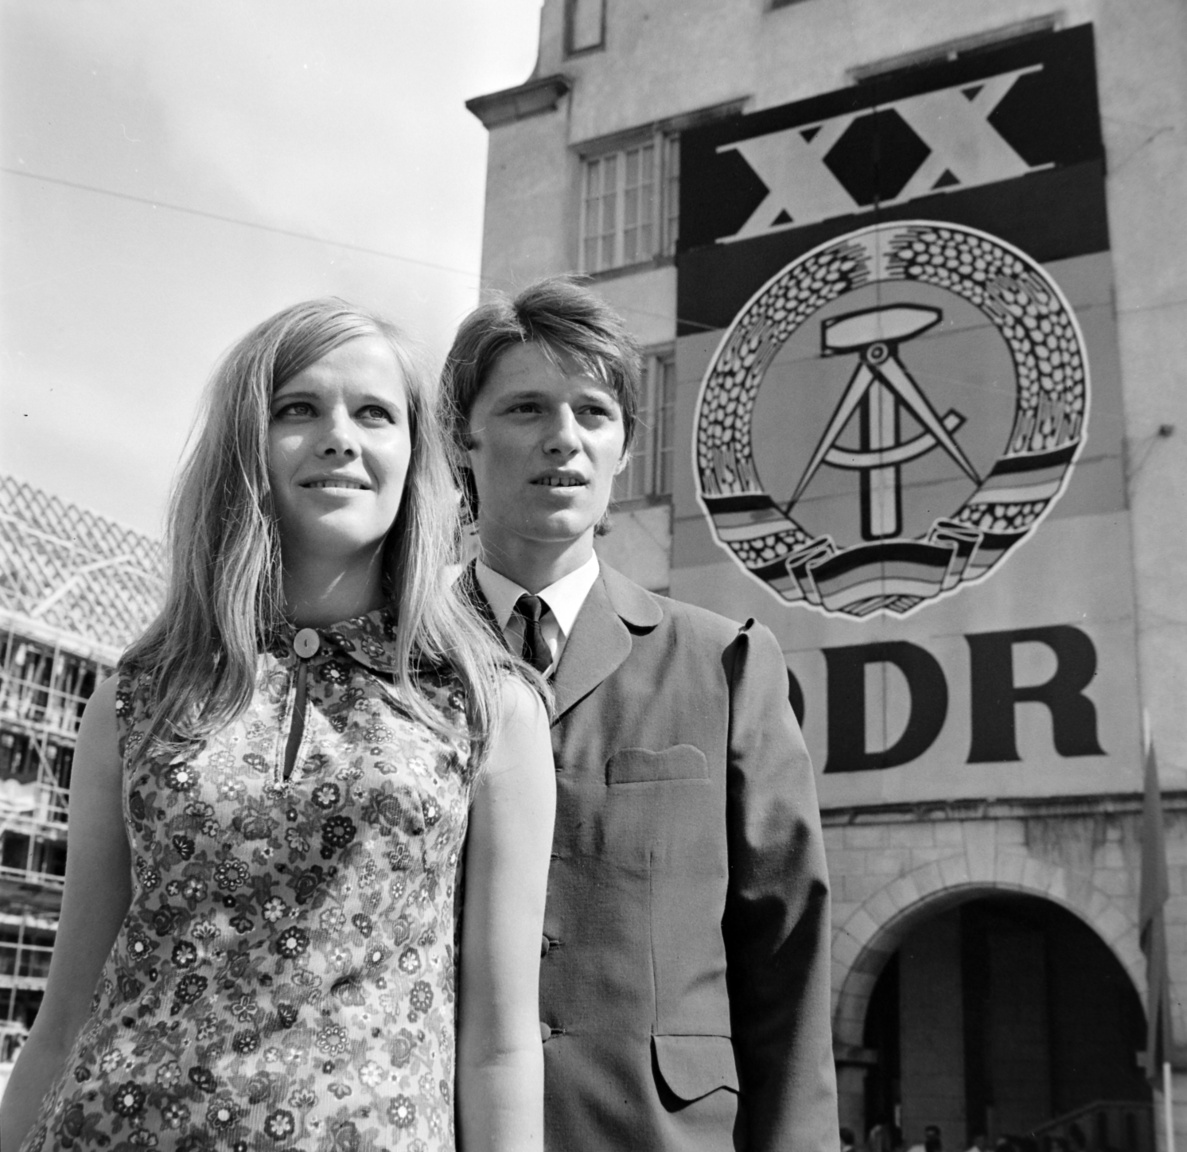 1969 - Optimistic youth at the 20th anniversary of the GDR. The young lady is wearing one of the remarkable achievements of the East German plastic industry, the synthetic fibre dress that released a spray of sparkles upon contact in the dark.